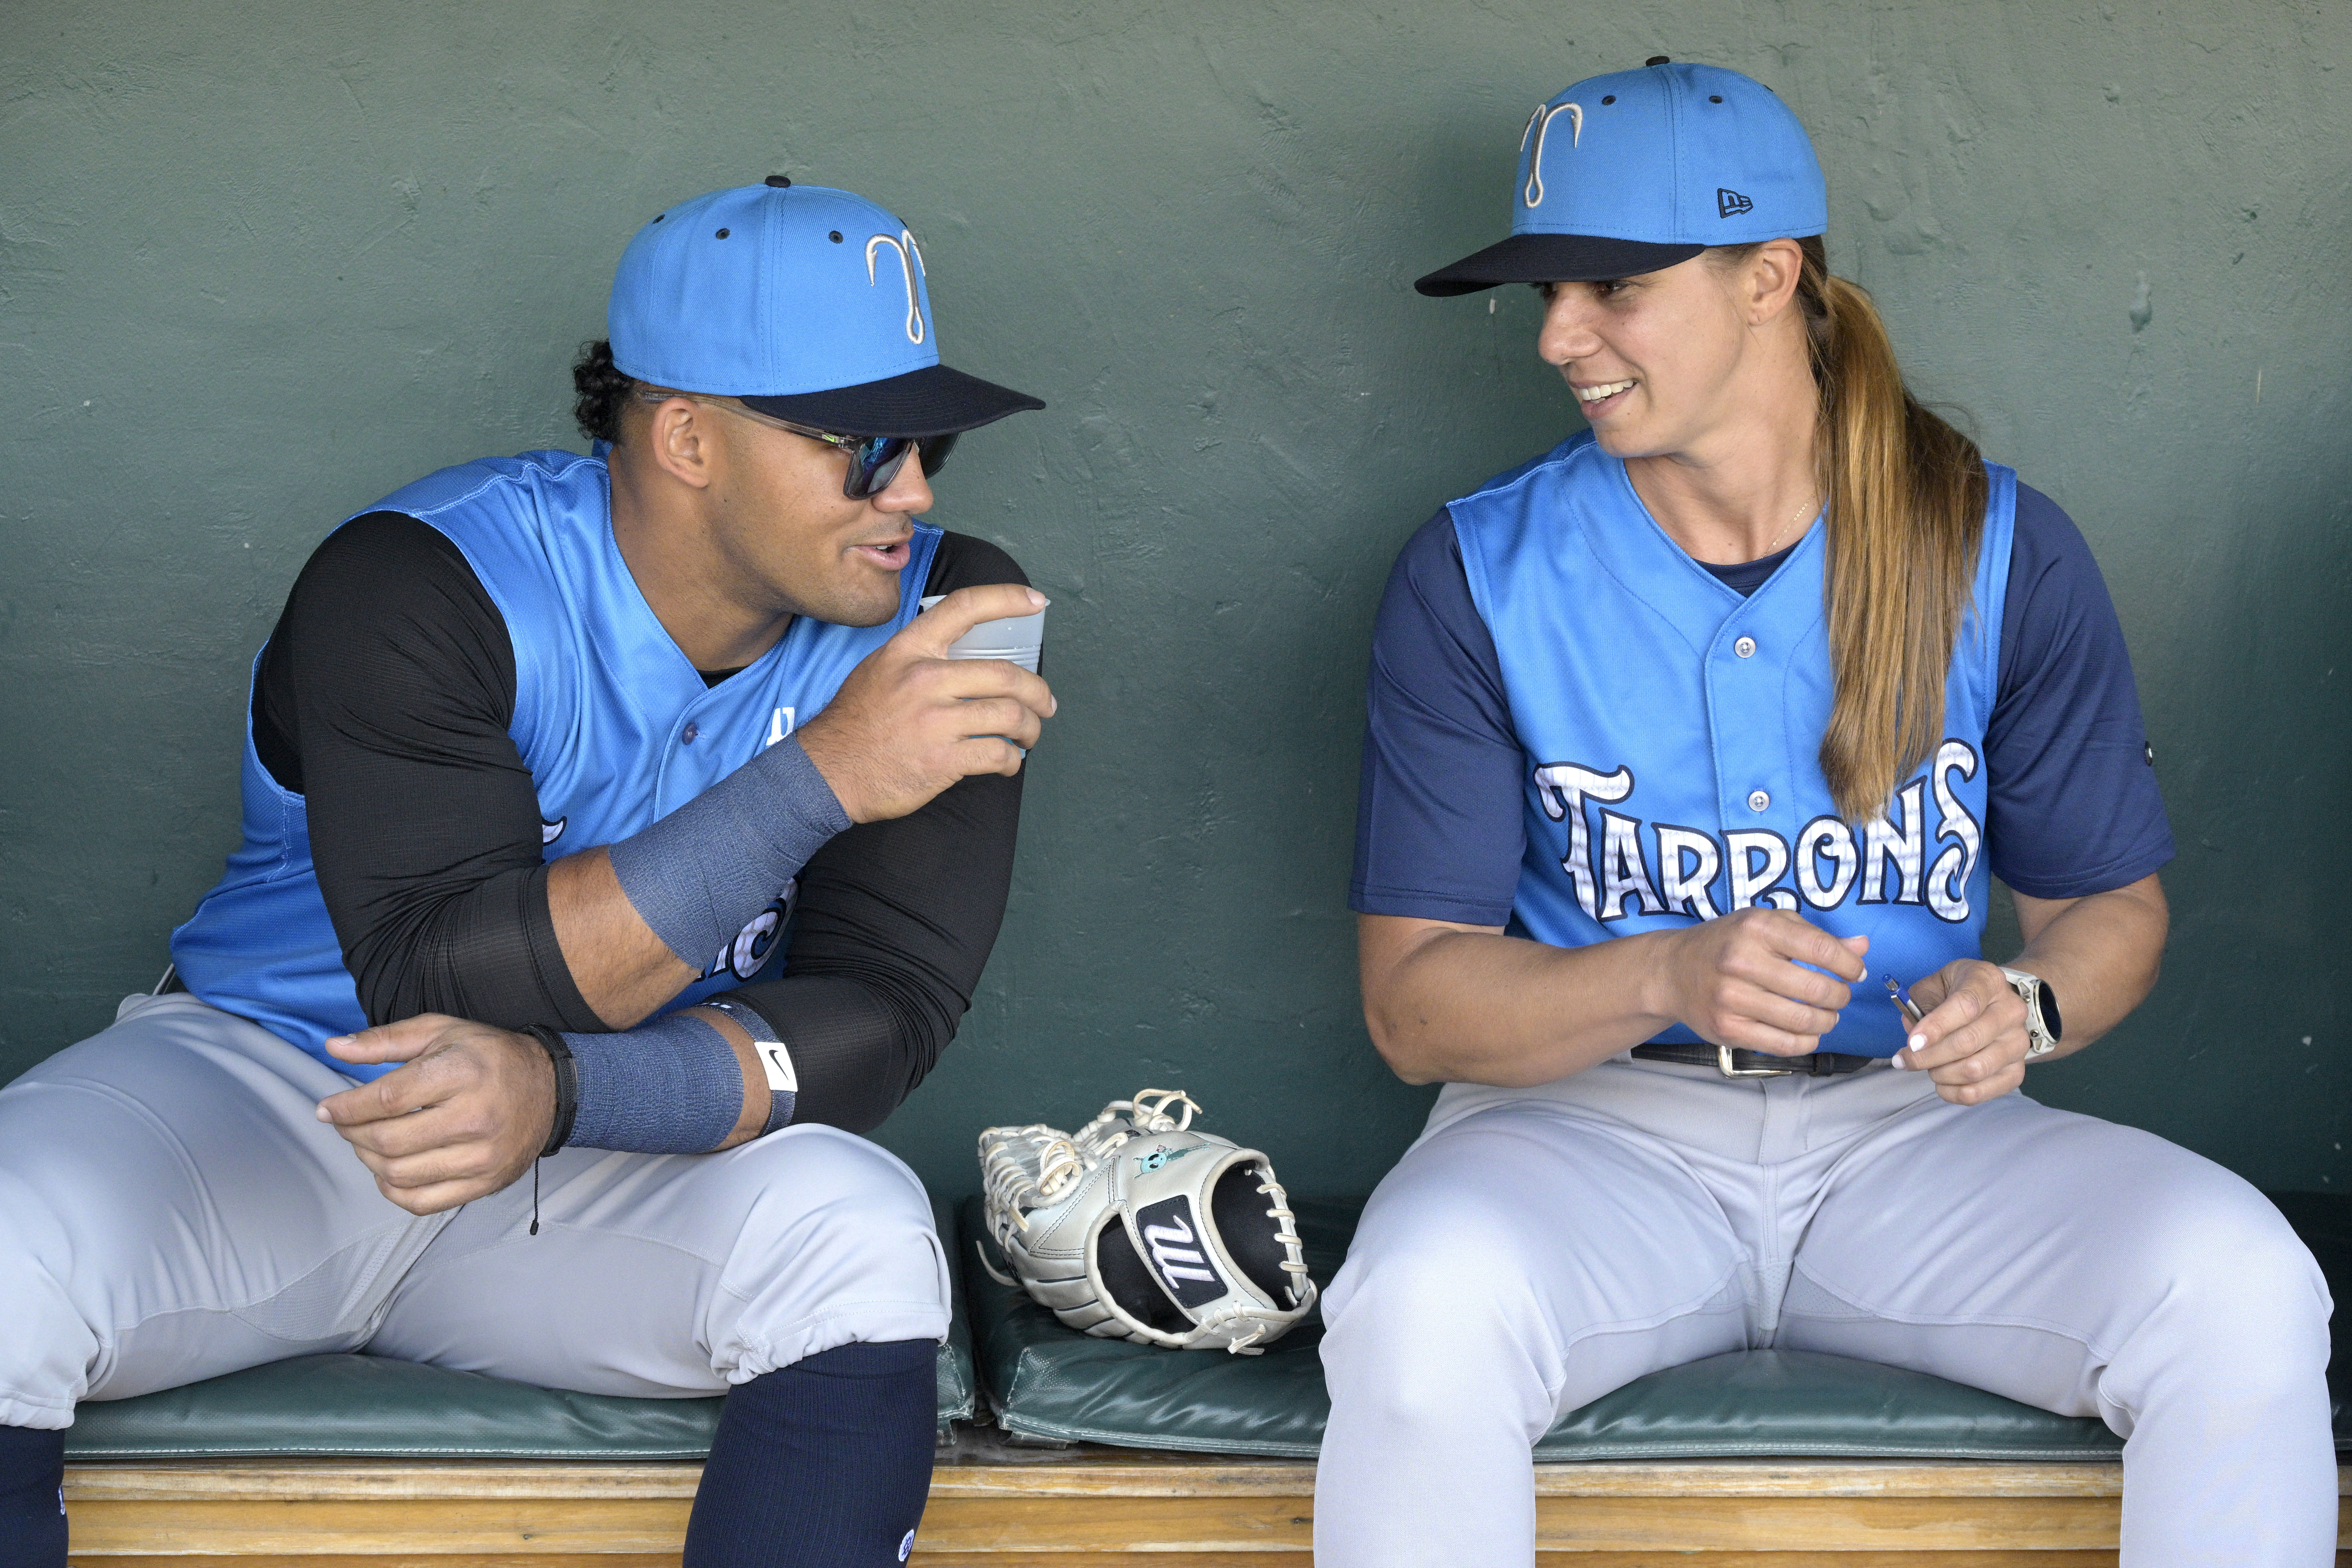 Yankees' Rachel Balkovec Becomes First Female Manager In Minor League  History 